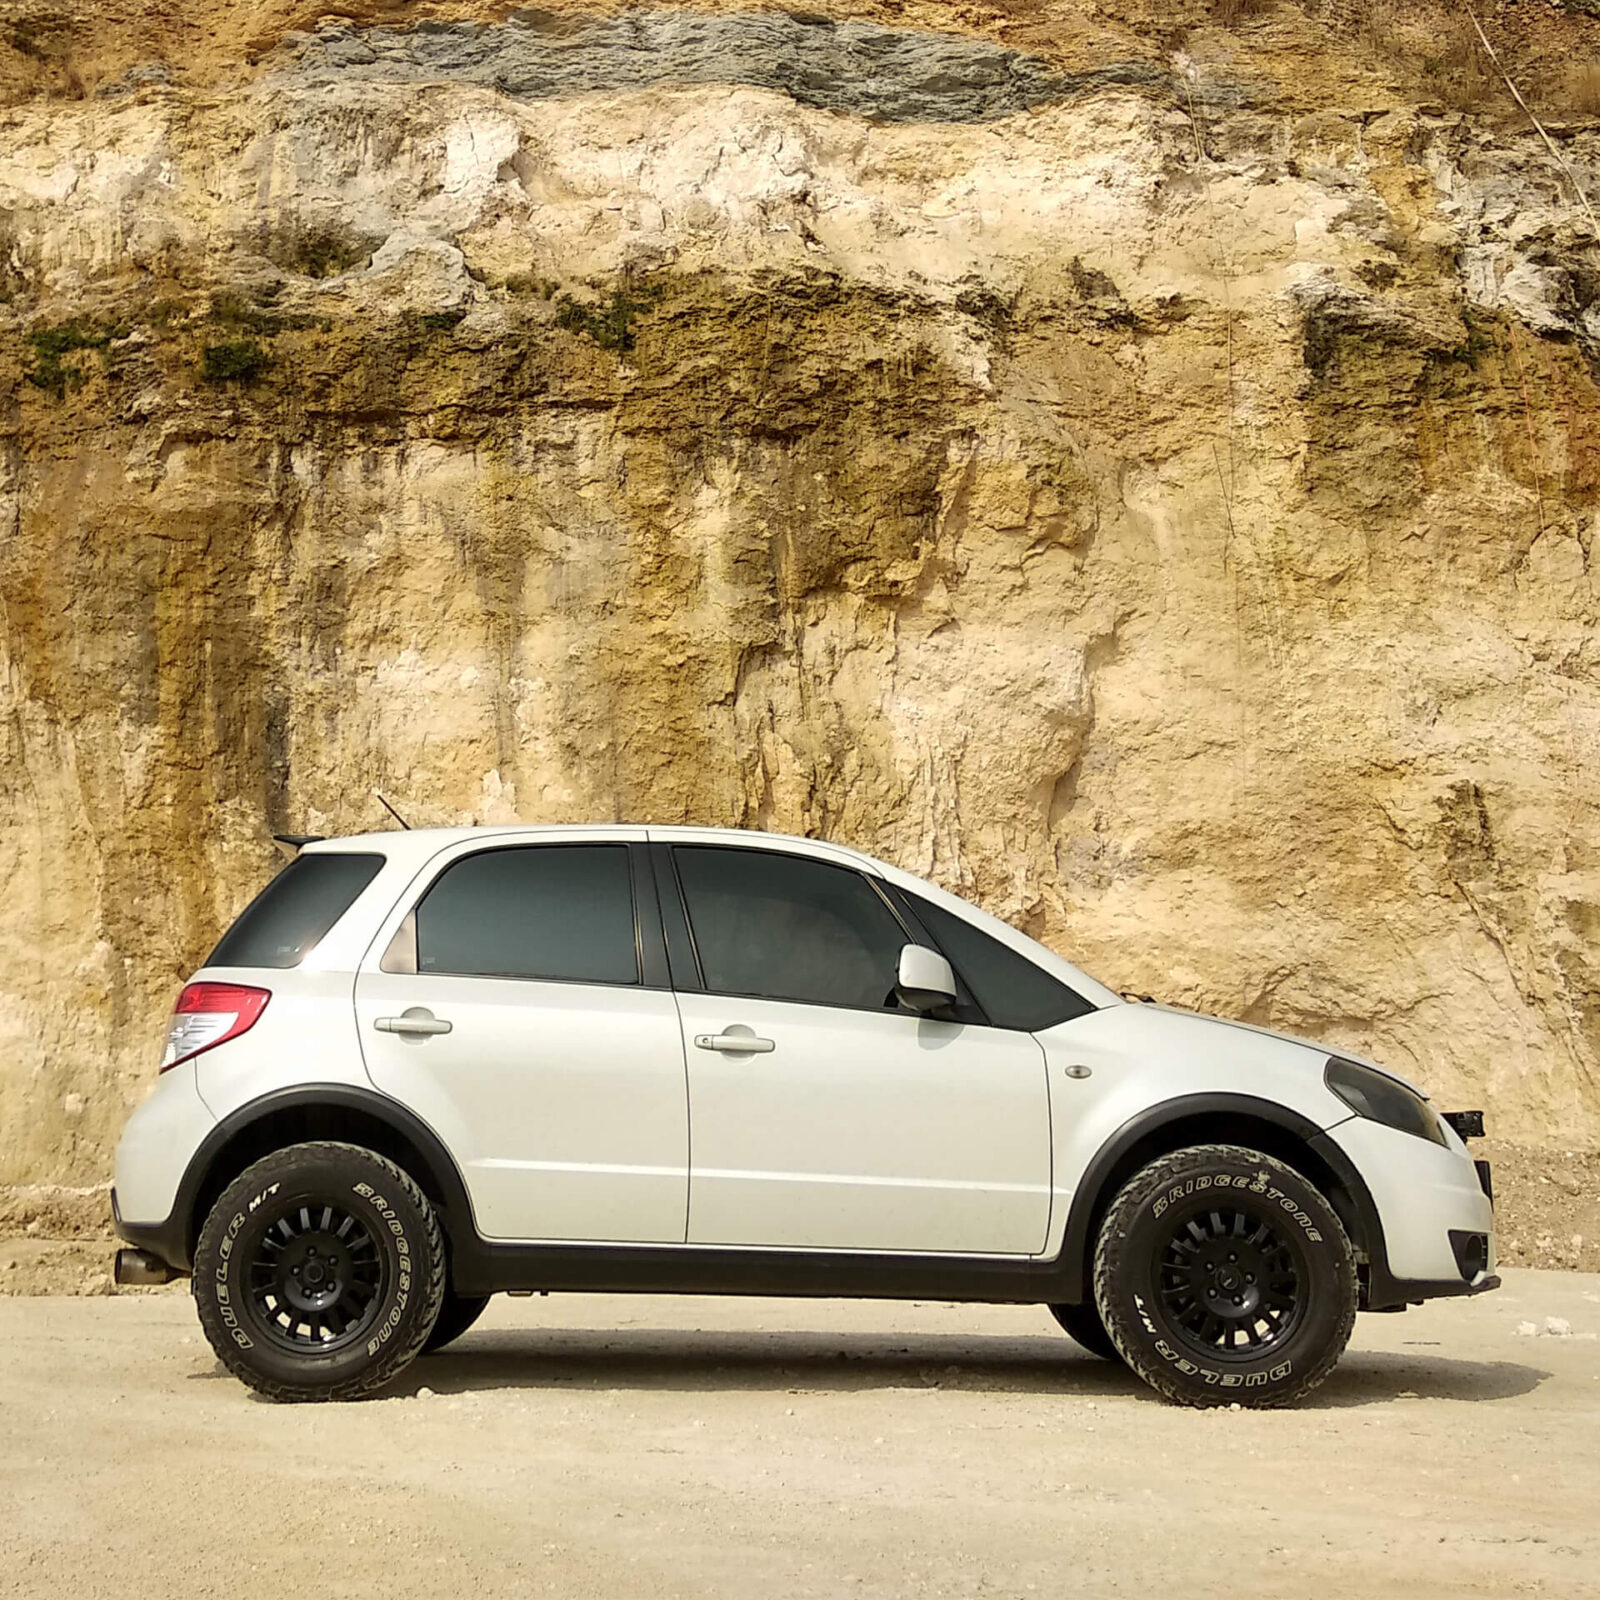 Lifted Suzuki SX4 With Off-road Tires – the Evolution From Rally to  Autocross - offroadium.com